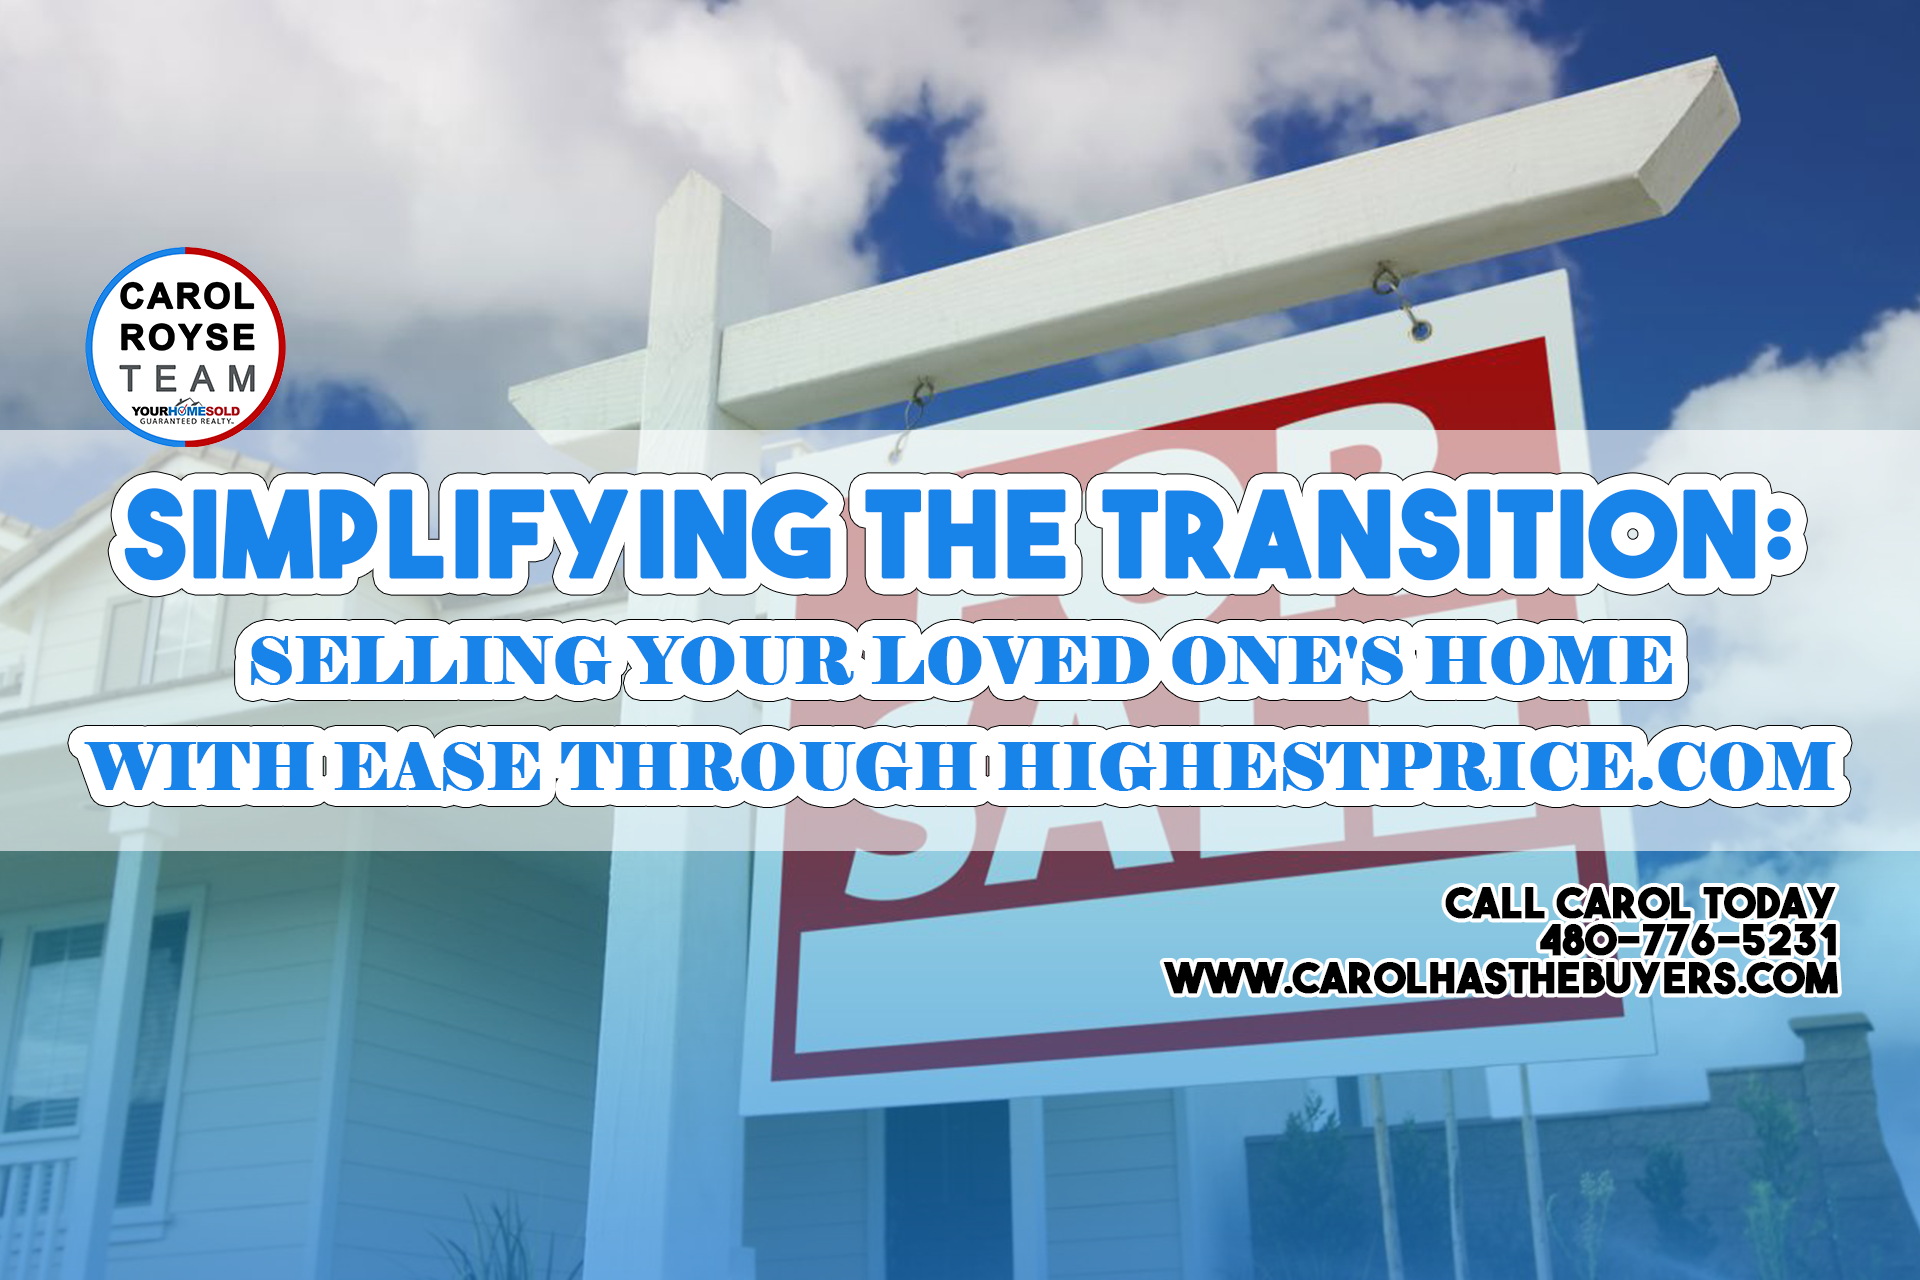 Simplifying the Transition: Selling Your Loved One’s Home with Ease through HighestPrice.com